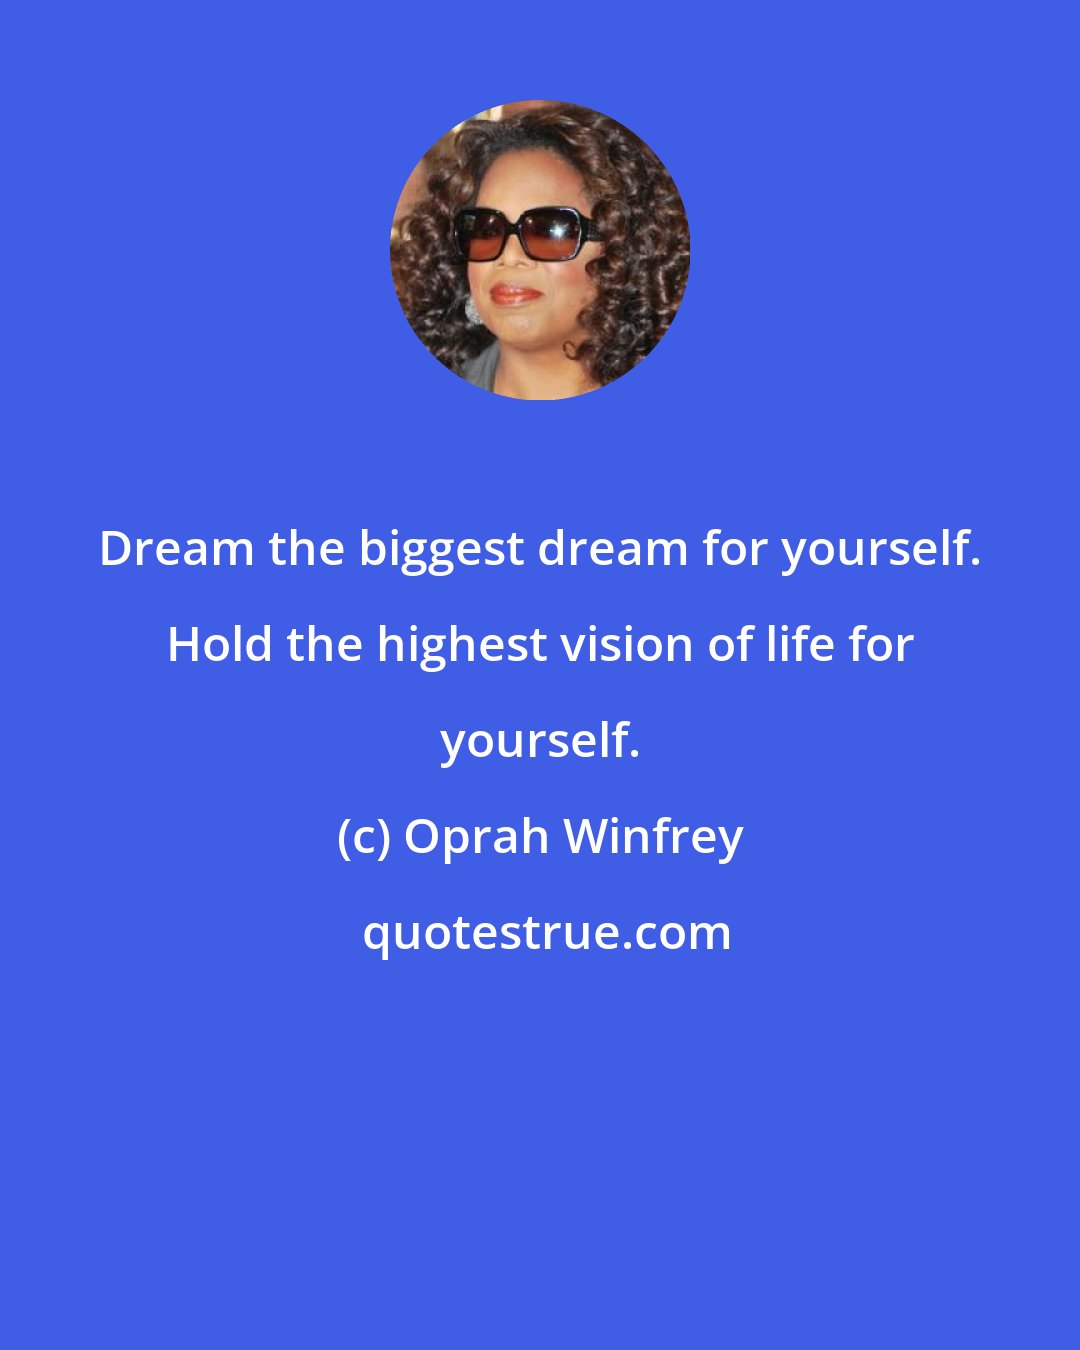 Oprah Winfrey: Dream the biggest dream for yourself. Hold the highest vision of life for yourself.